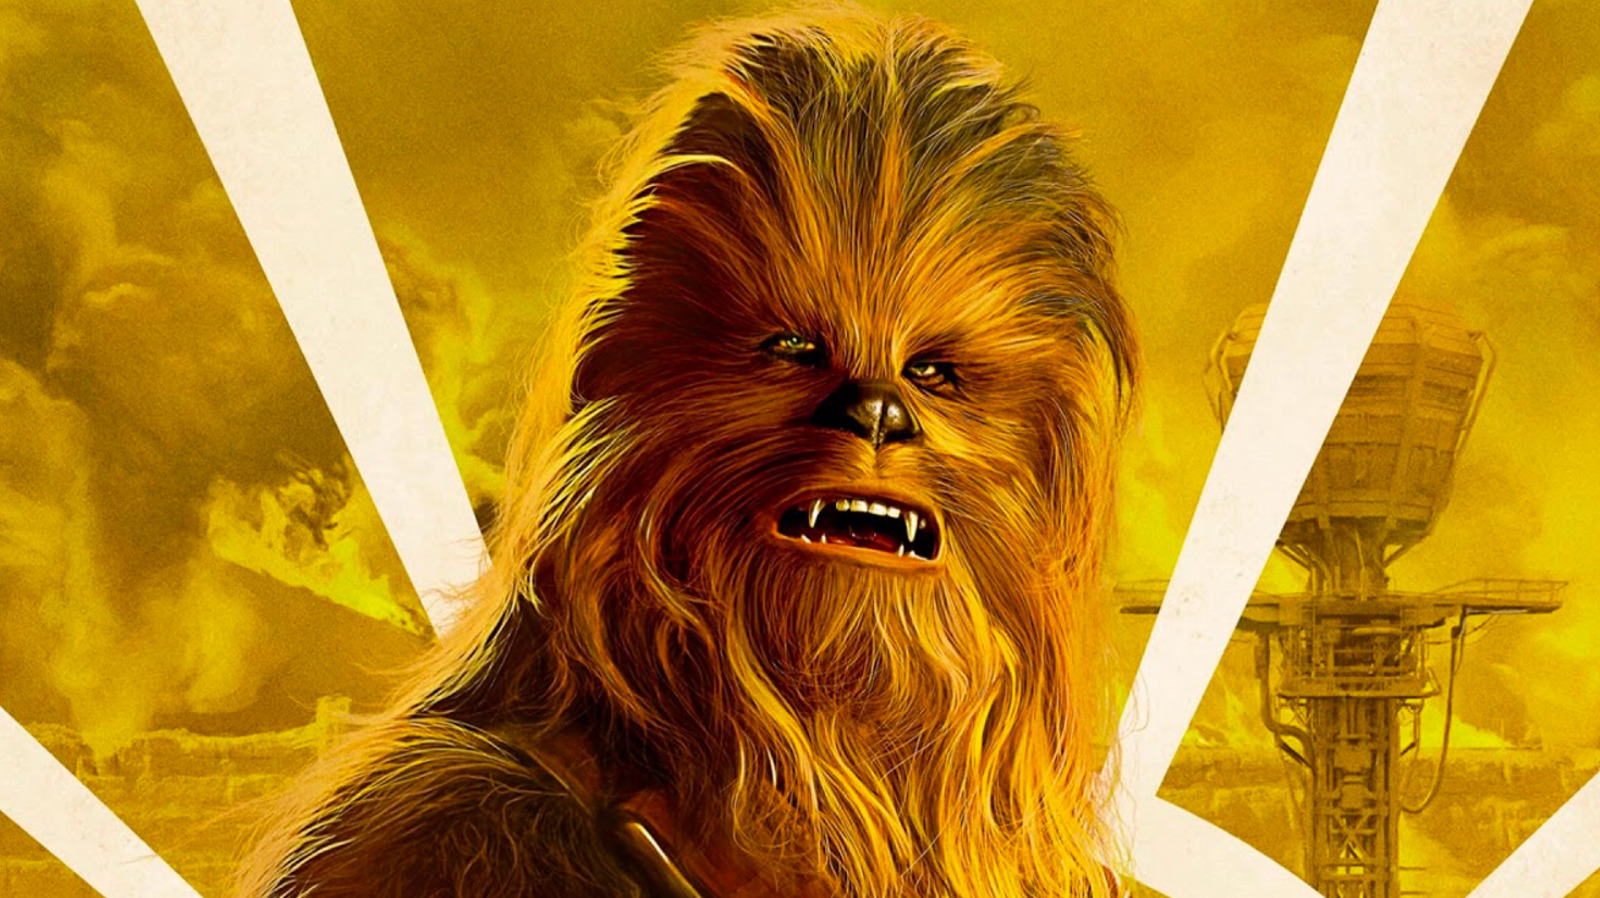 Chewbacca Almost Wore Shorts In Star Wars Due To Complaints From Executives